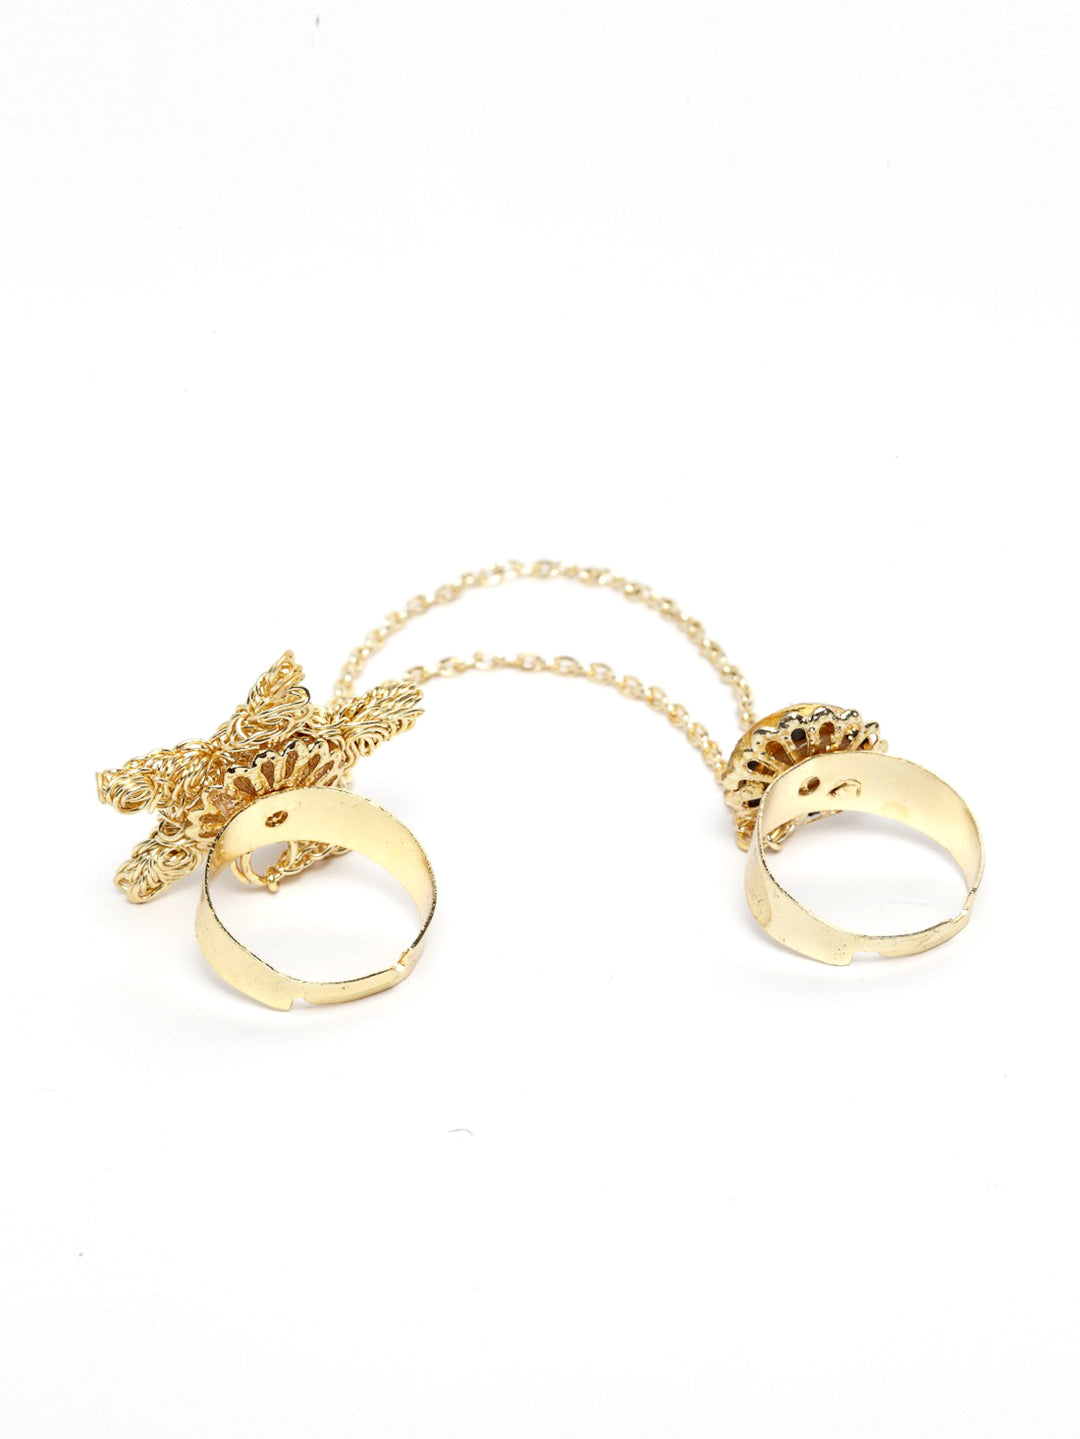 Gold-Plated Stone Studded Dual Finger Ring in Star Pattern